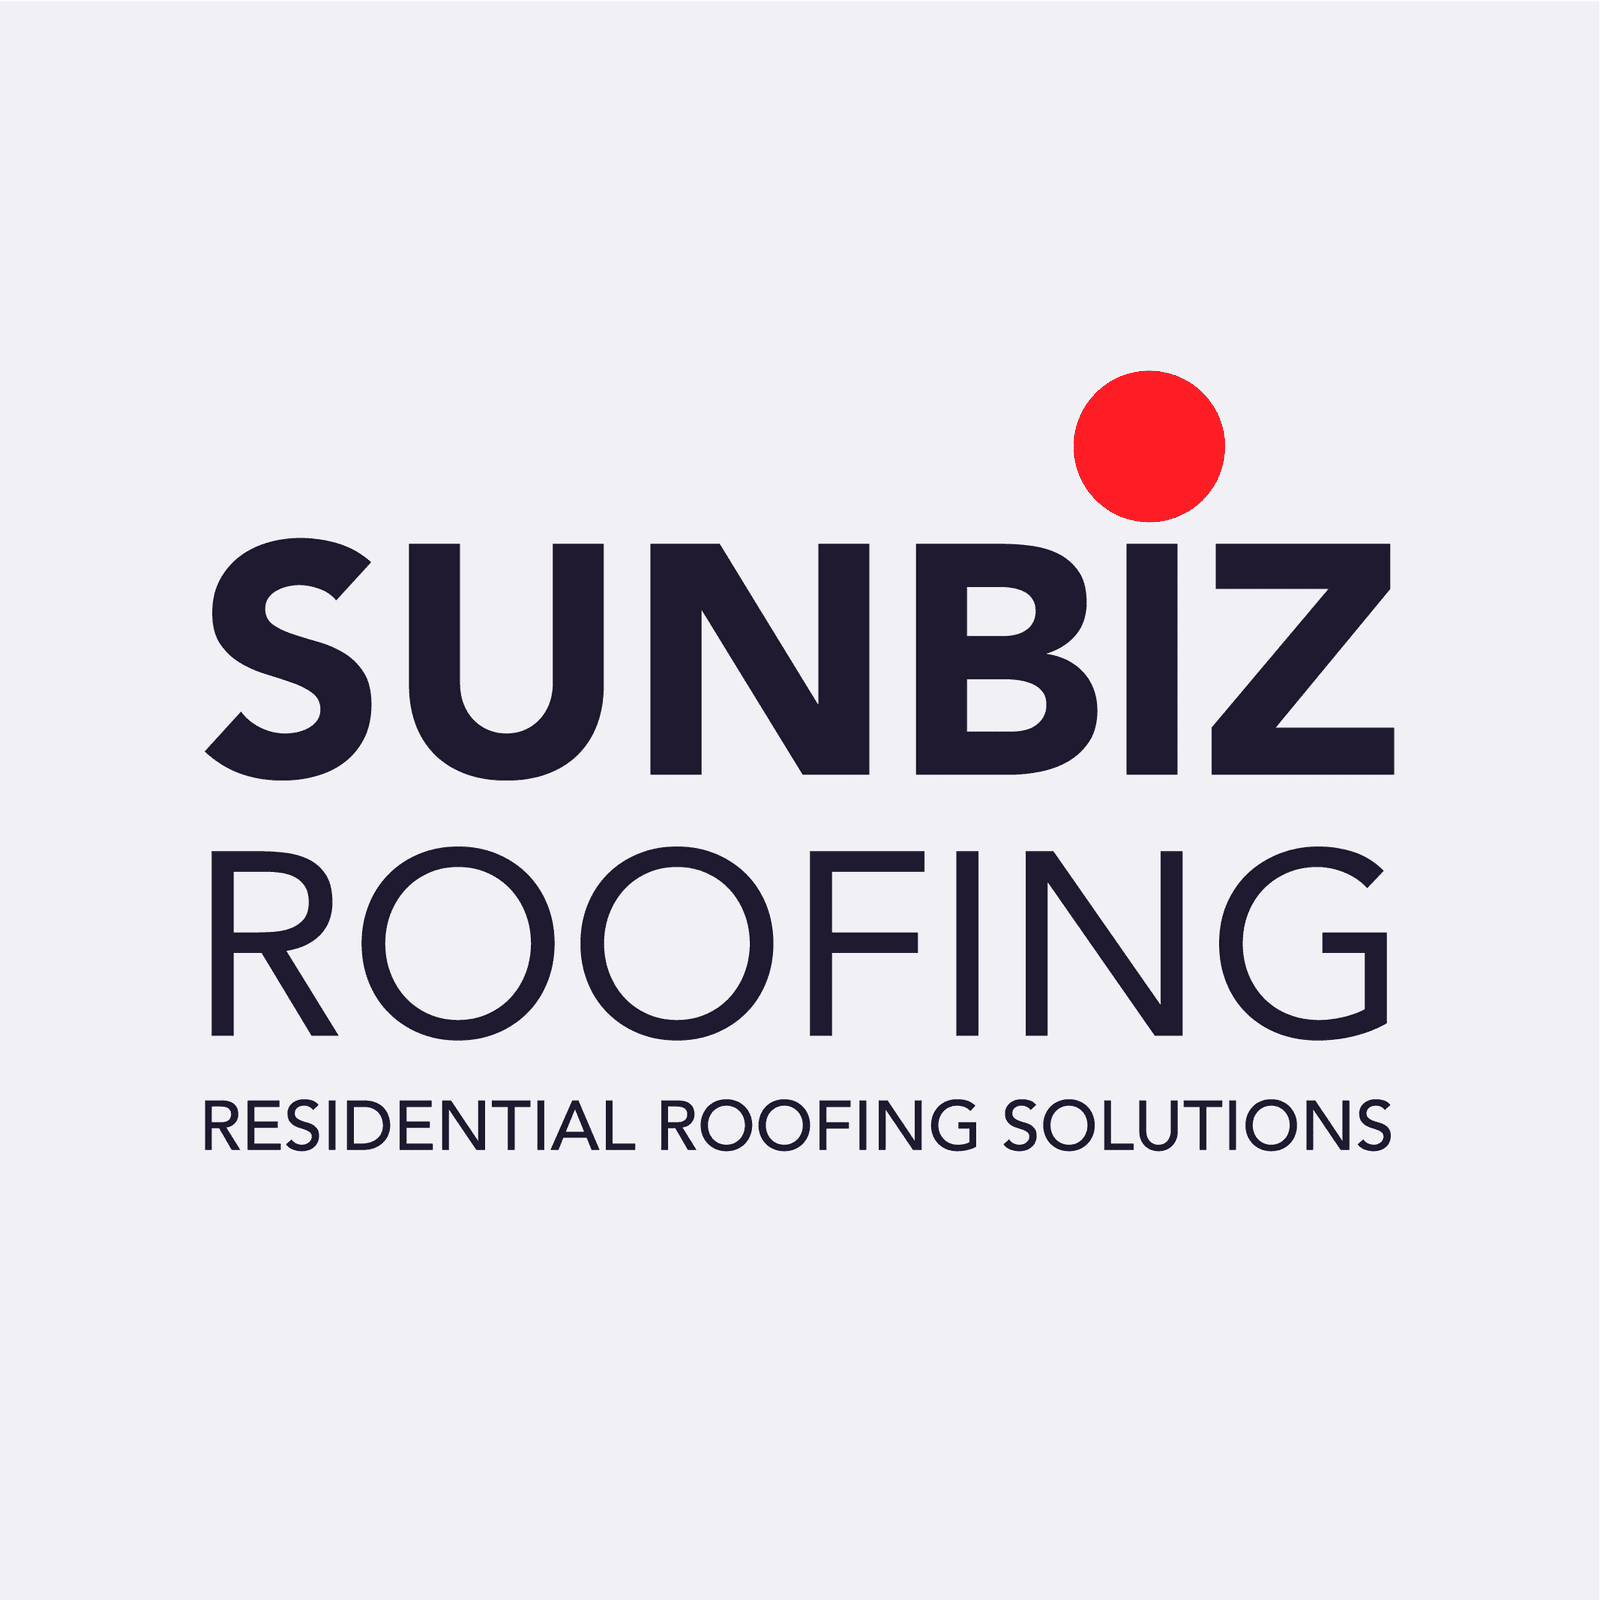 Sunbiz Roofing - Residential Roofing Solutions